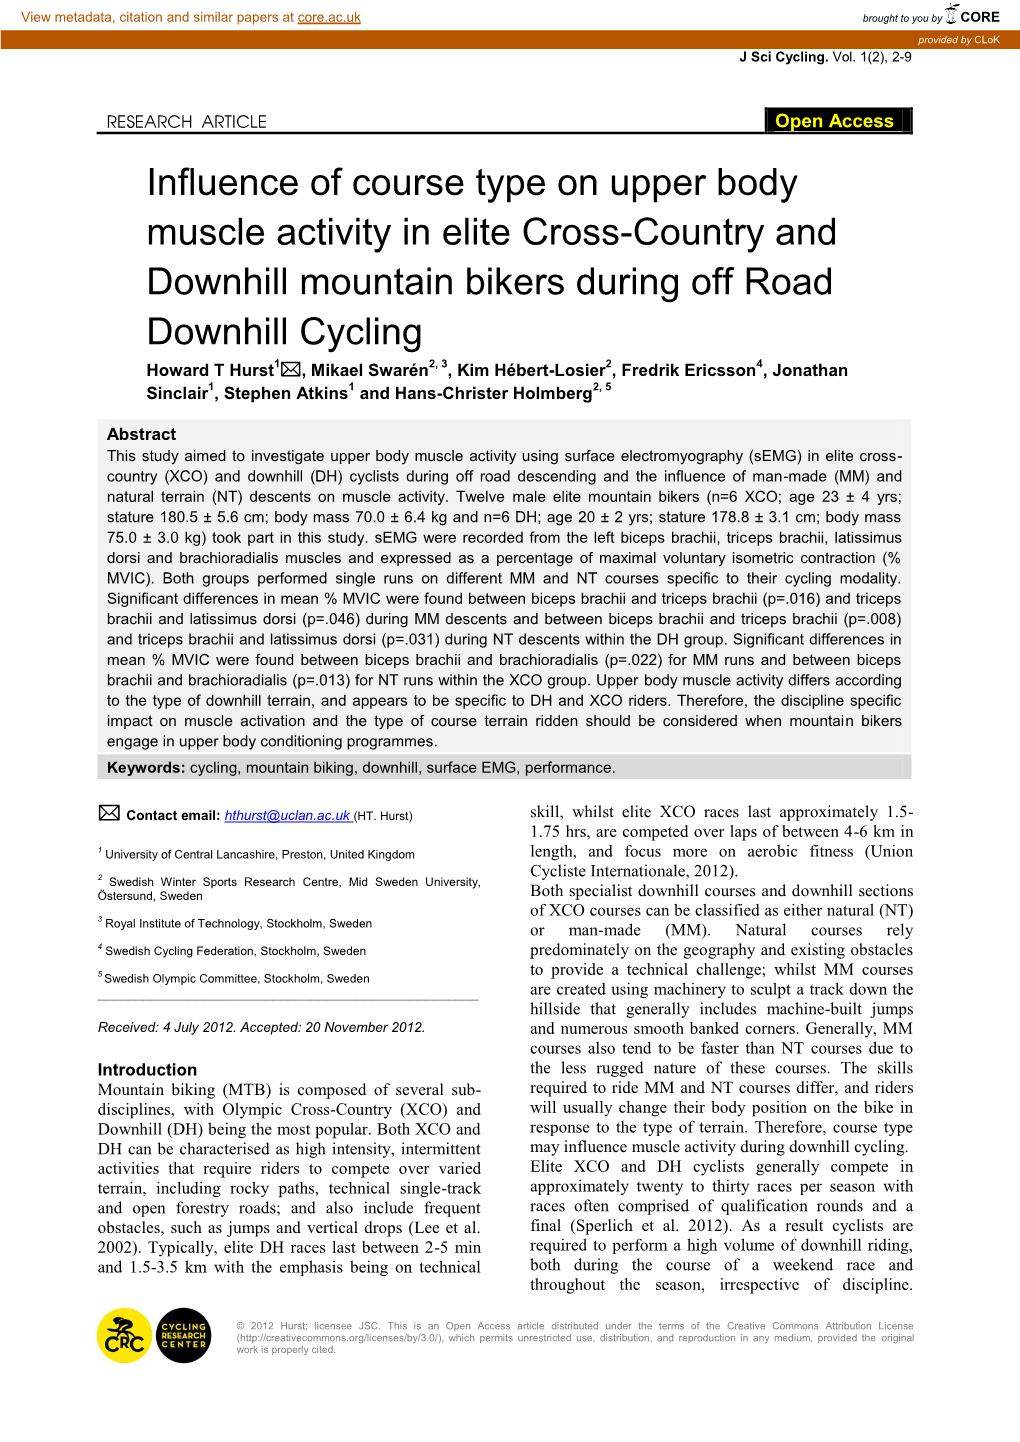 Influence of Course Type on Upper Body Muscle Activity in Elite Cross